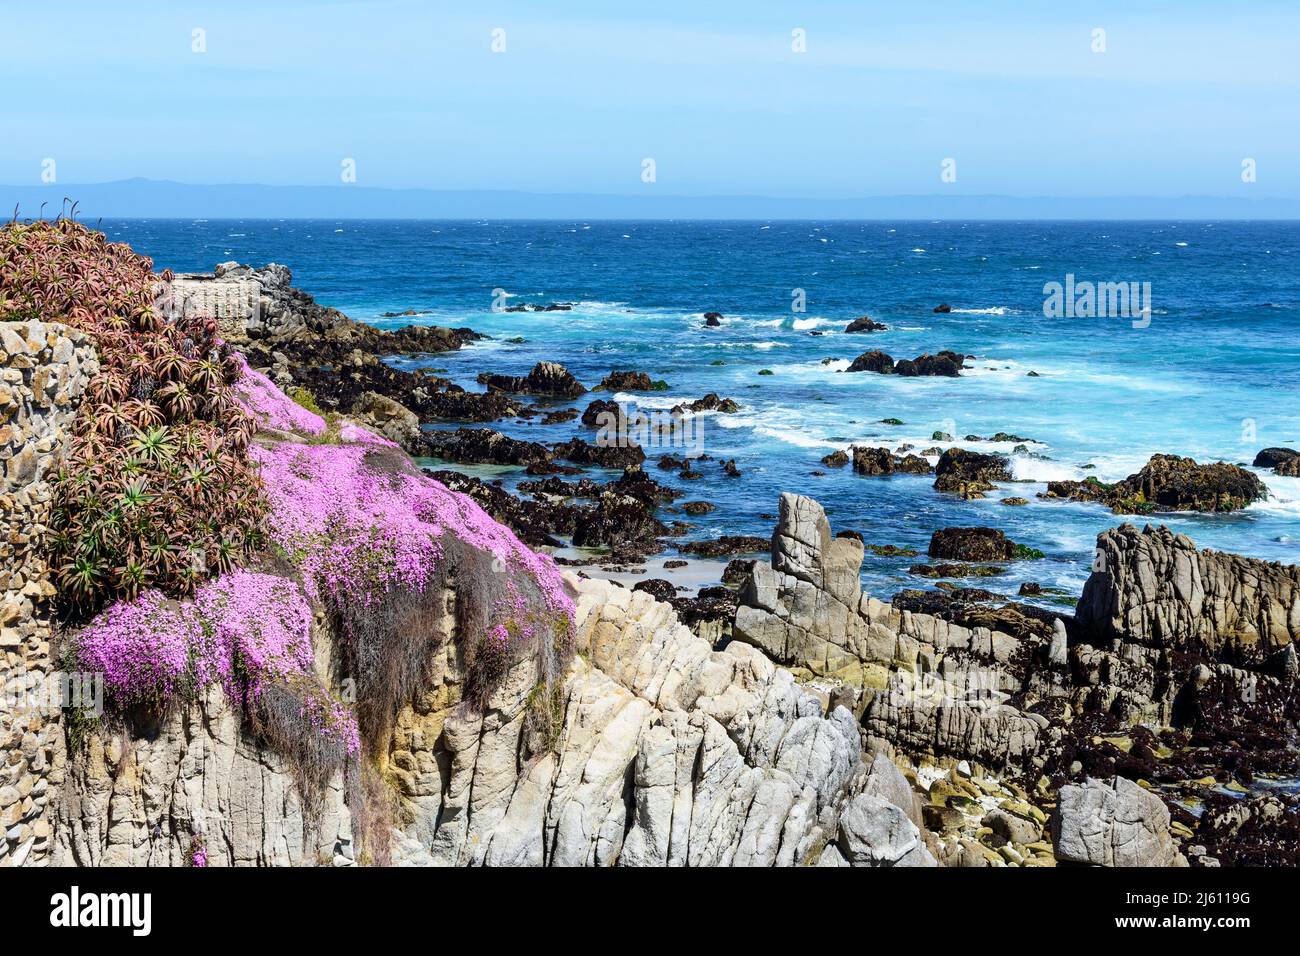 Blooming pale dewplant succulent on rocky shore of Monterey Bay coastline at Pacific Grove, California Stock Photo